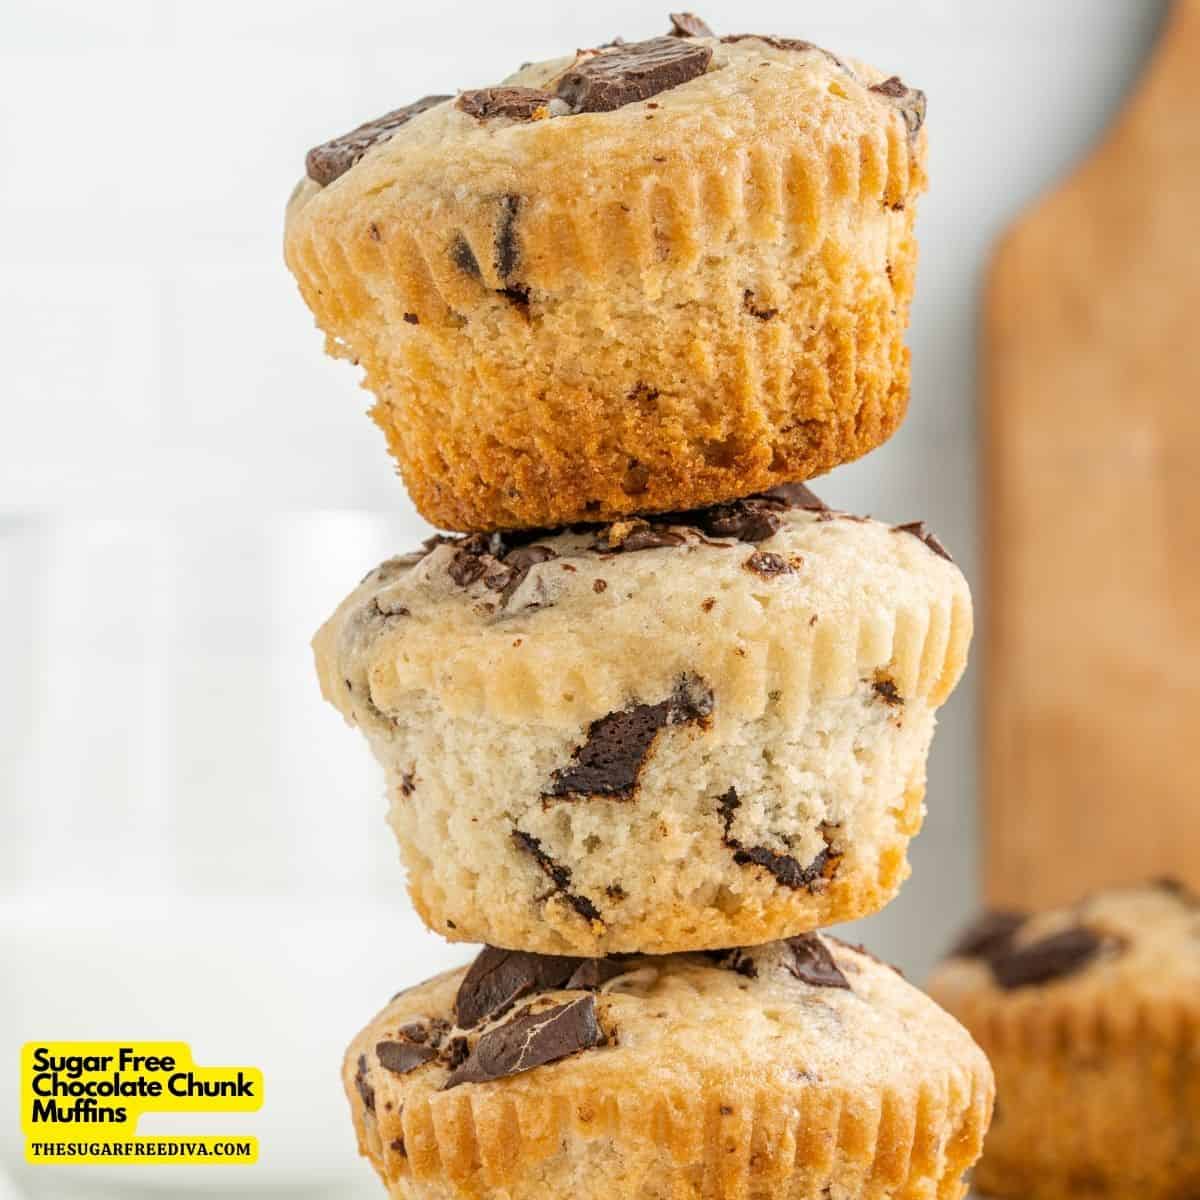 Sugar Free Chocolate Chunk Muffins, a simple recipe for a bakery style breakfast or brunch recipe made with no added sugar.